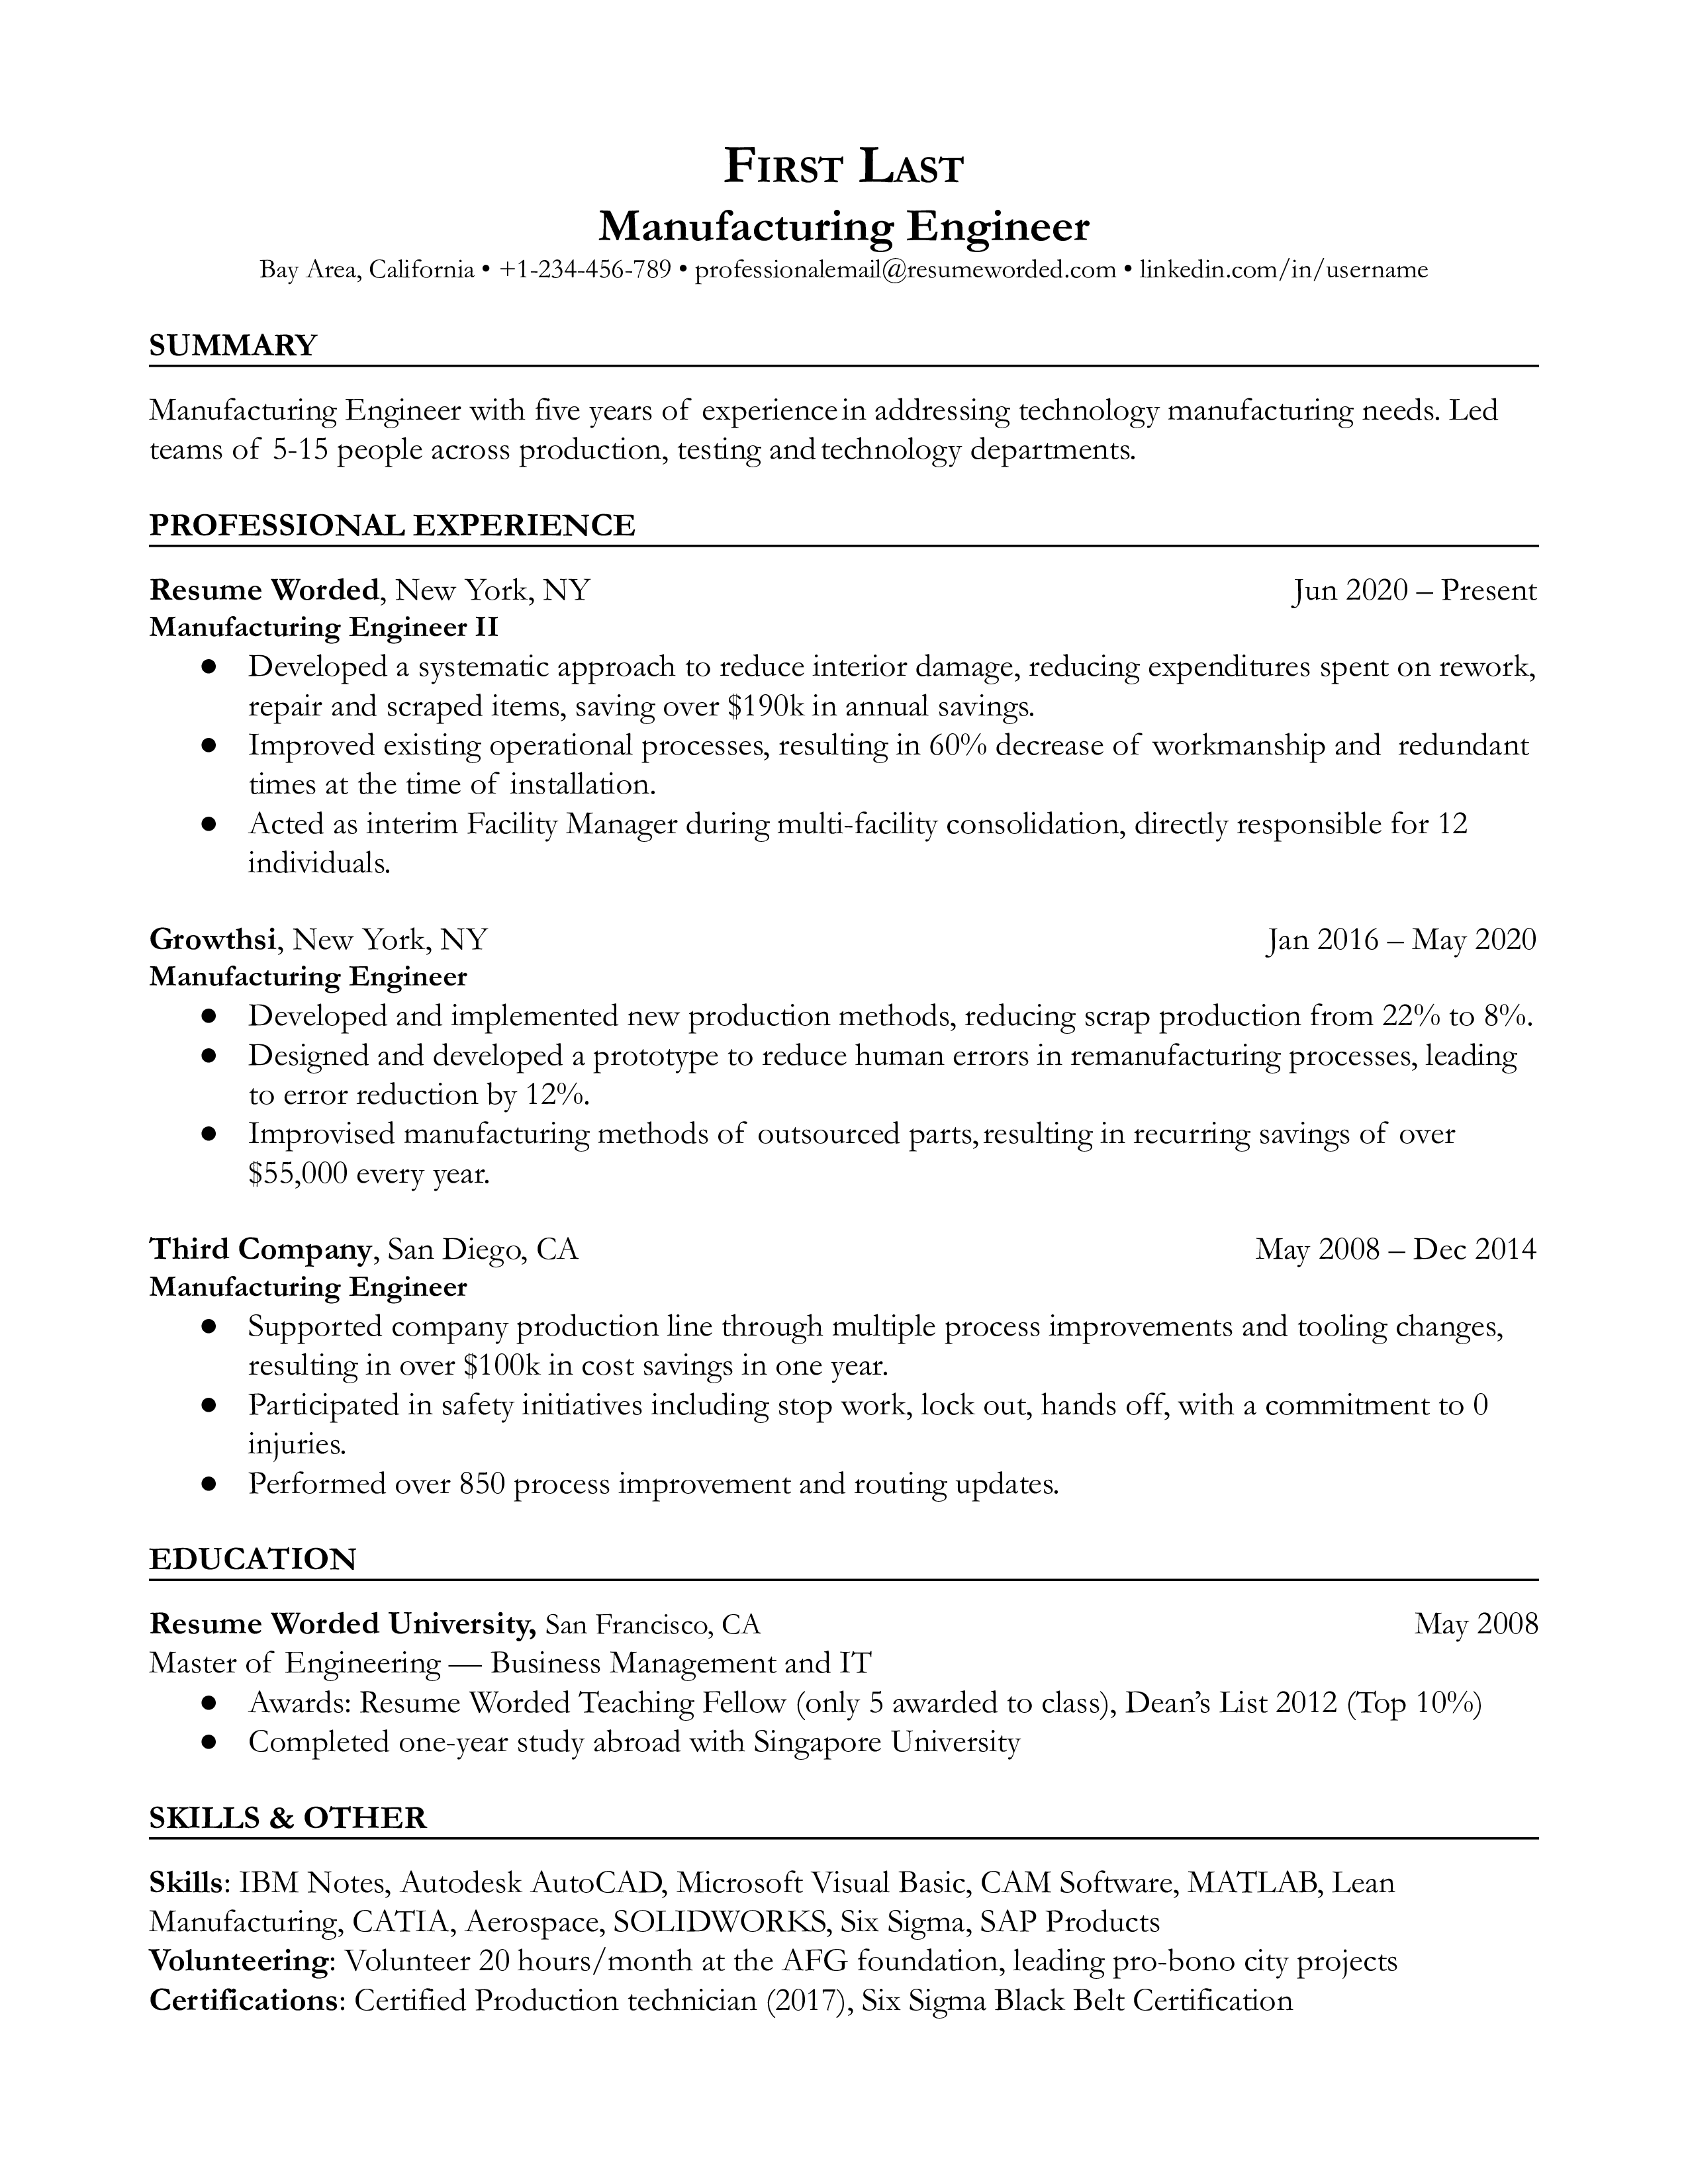 A manufacturing engineer resume with a focus on its associated tools, and reference internal promotions.